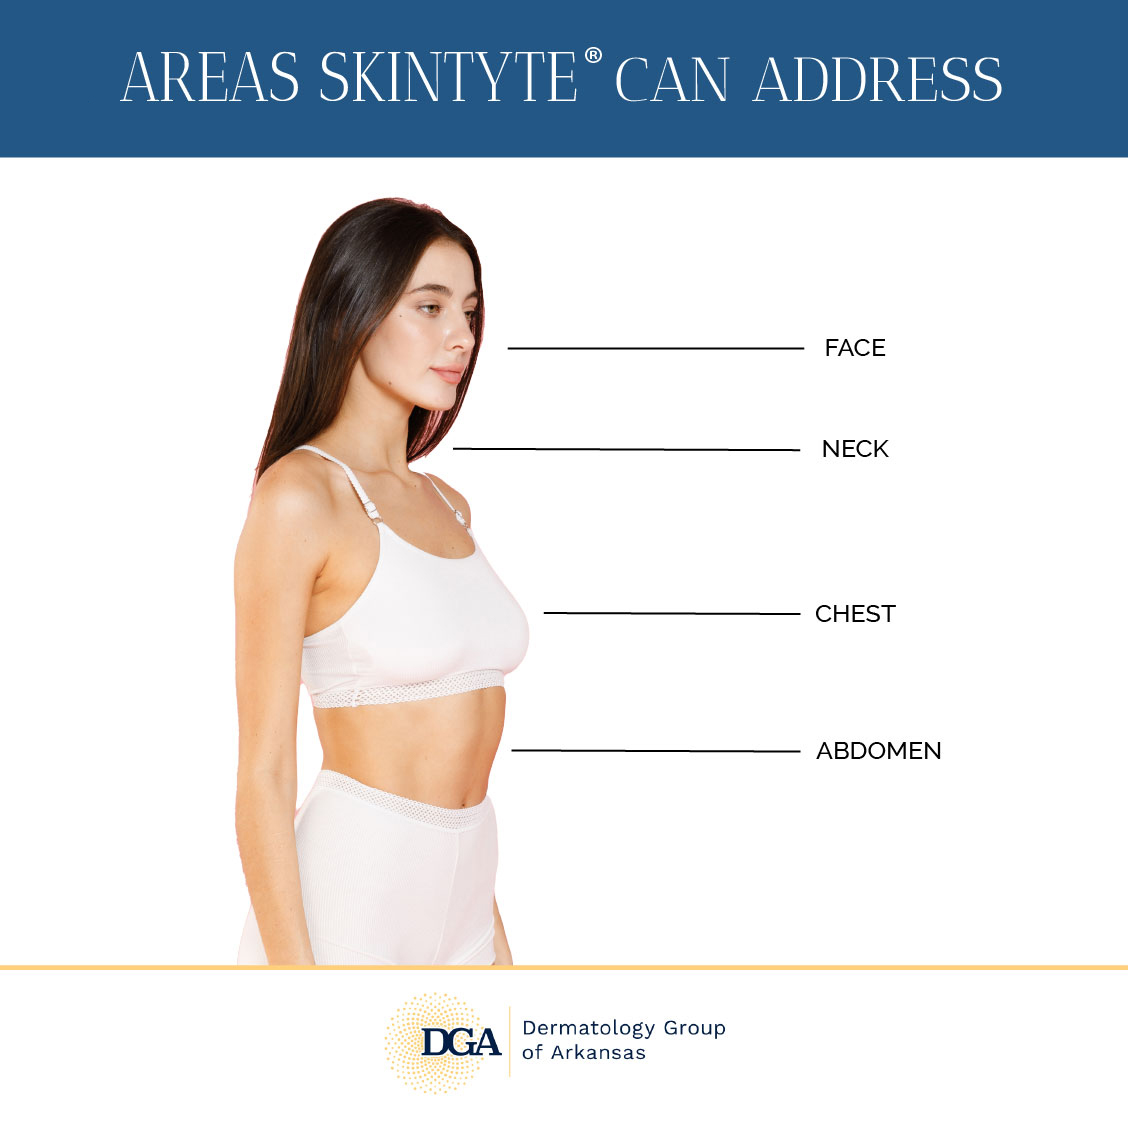 Address skin laxity with the infrared-powered SkinTyte™ at the Little Rock area's Dermatology Group of Arkansas.